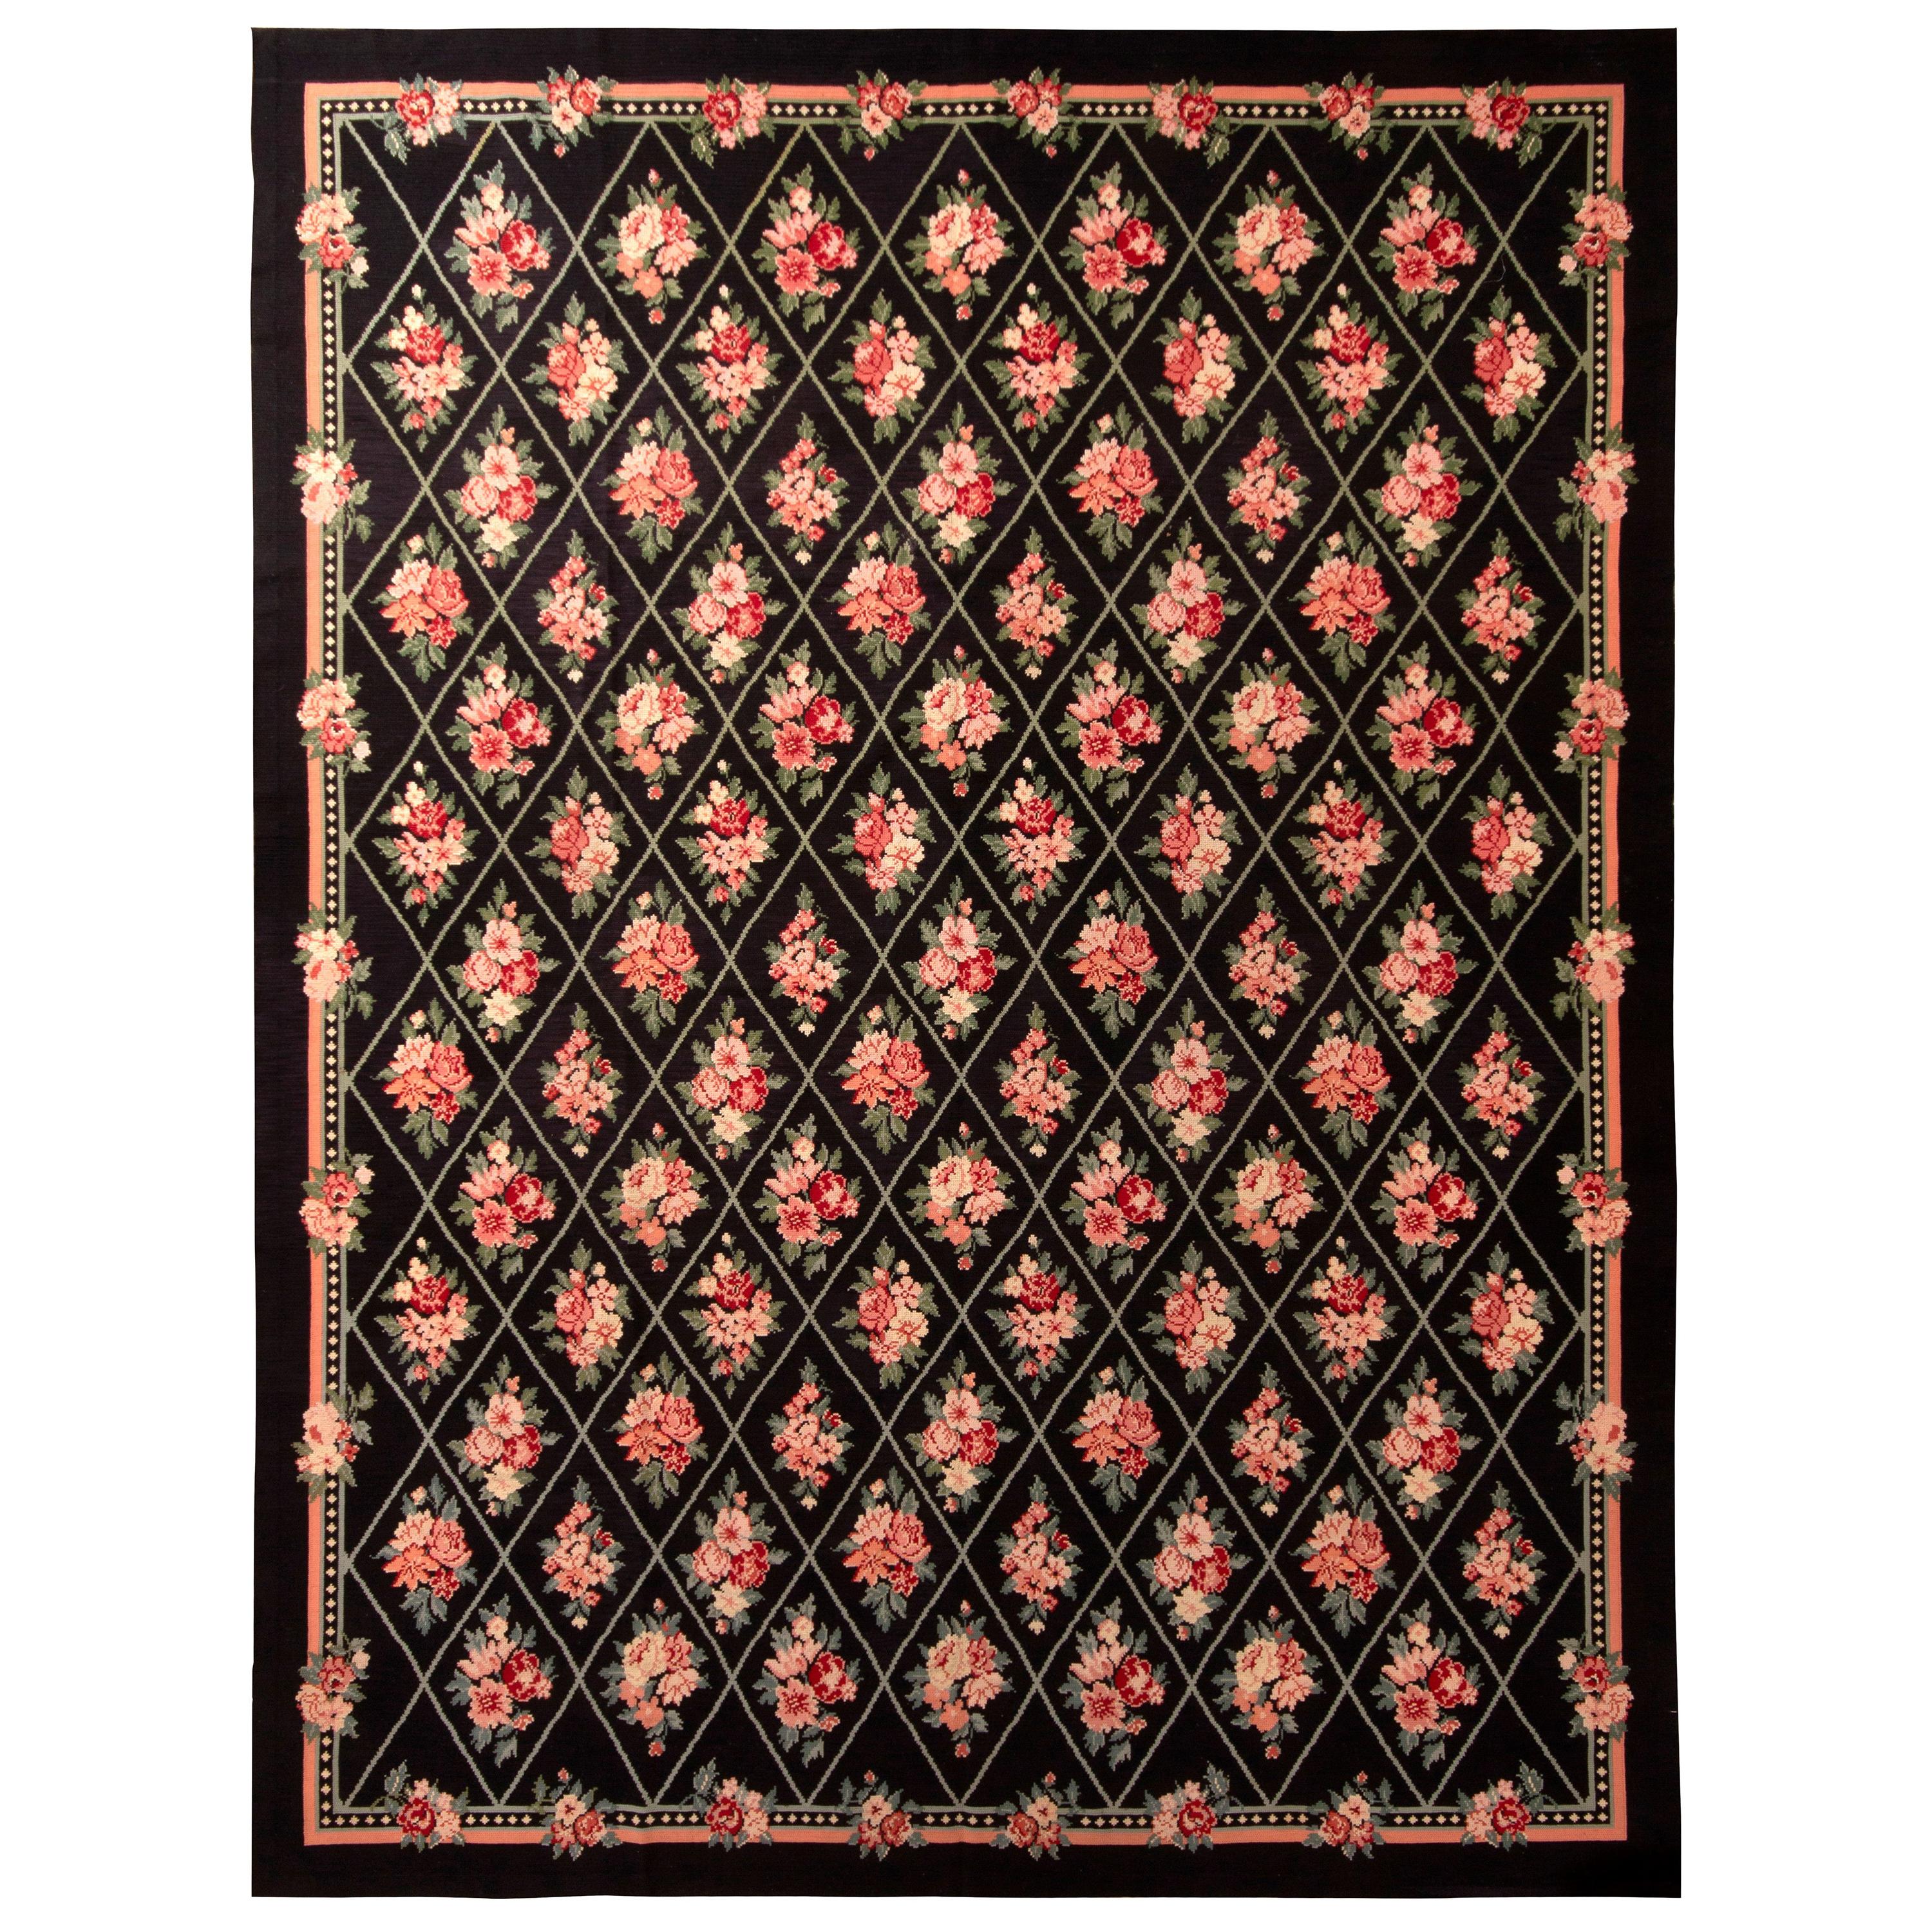 Contemporary Needlepoint Flat-Weave Wool Black Pink and Green Floral Kilim Rug